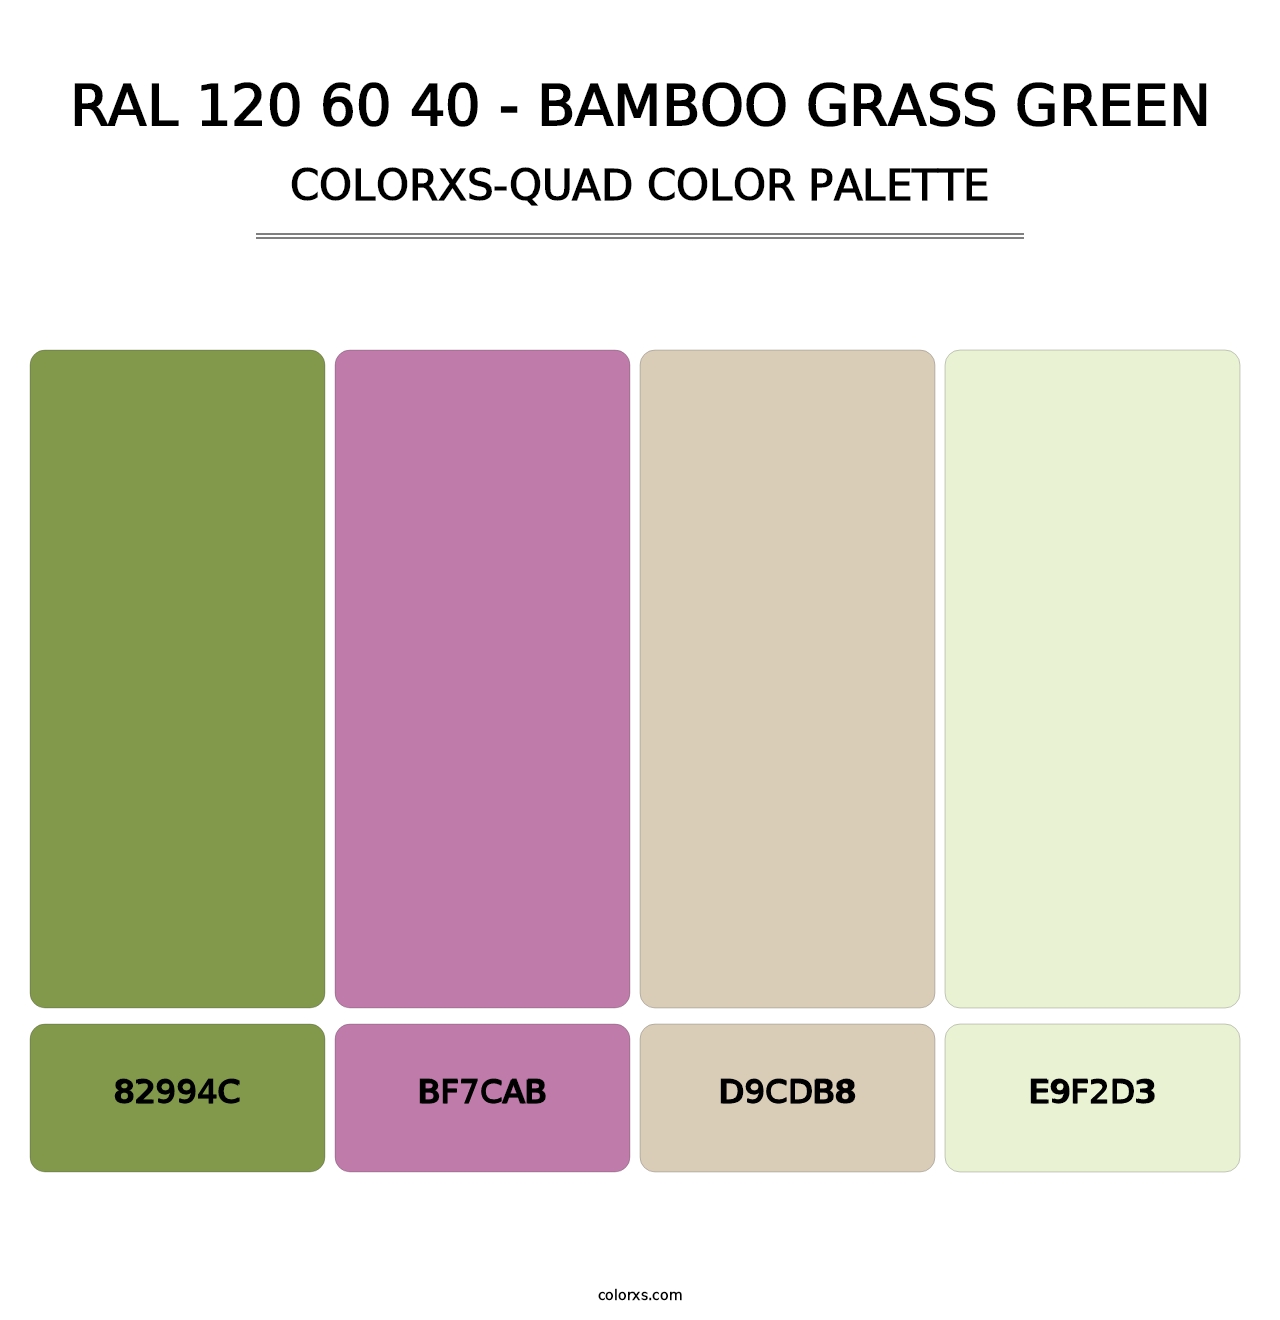 RAL 120 60 40 - Bamboo Grass Green - Colorxs Quad Palette